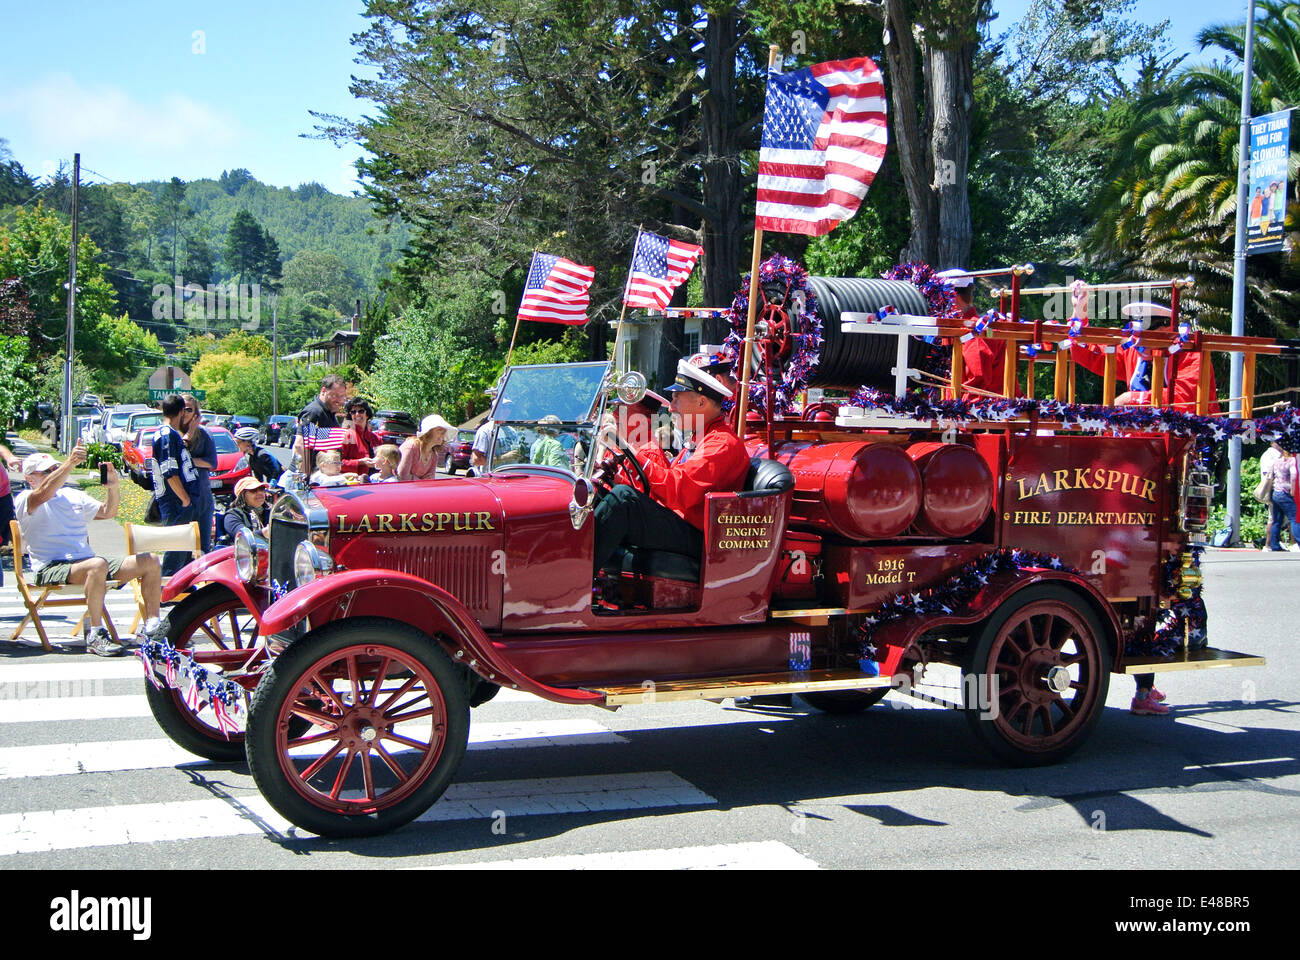 Corte Madera, California, US. July 4th 2014. Larkspur firemen drive 1916 Model T ford fire engine in the annual independence day parade in Corte Madera, California. Credit:  Bob Kreisel/Alamy Live News Stock Photo